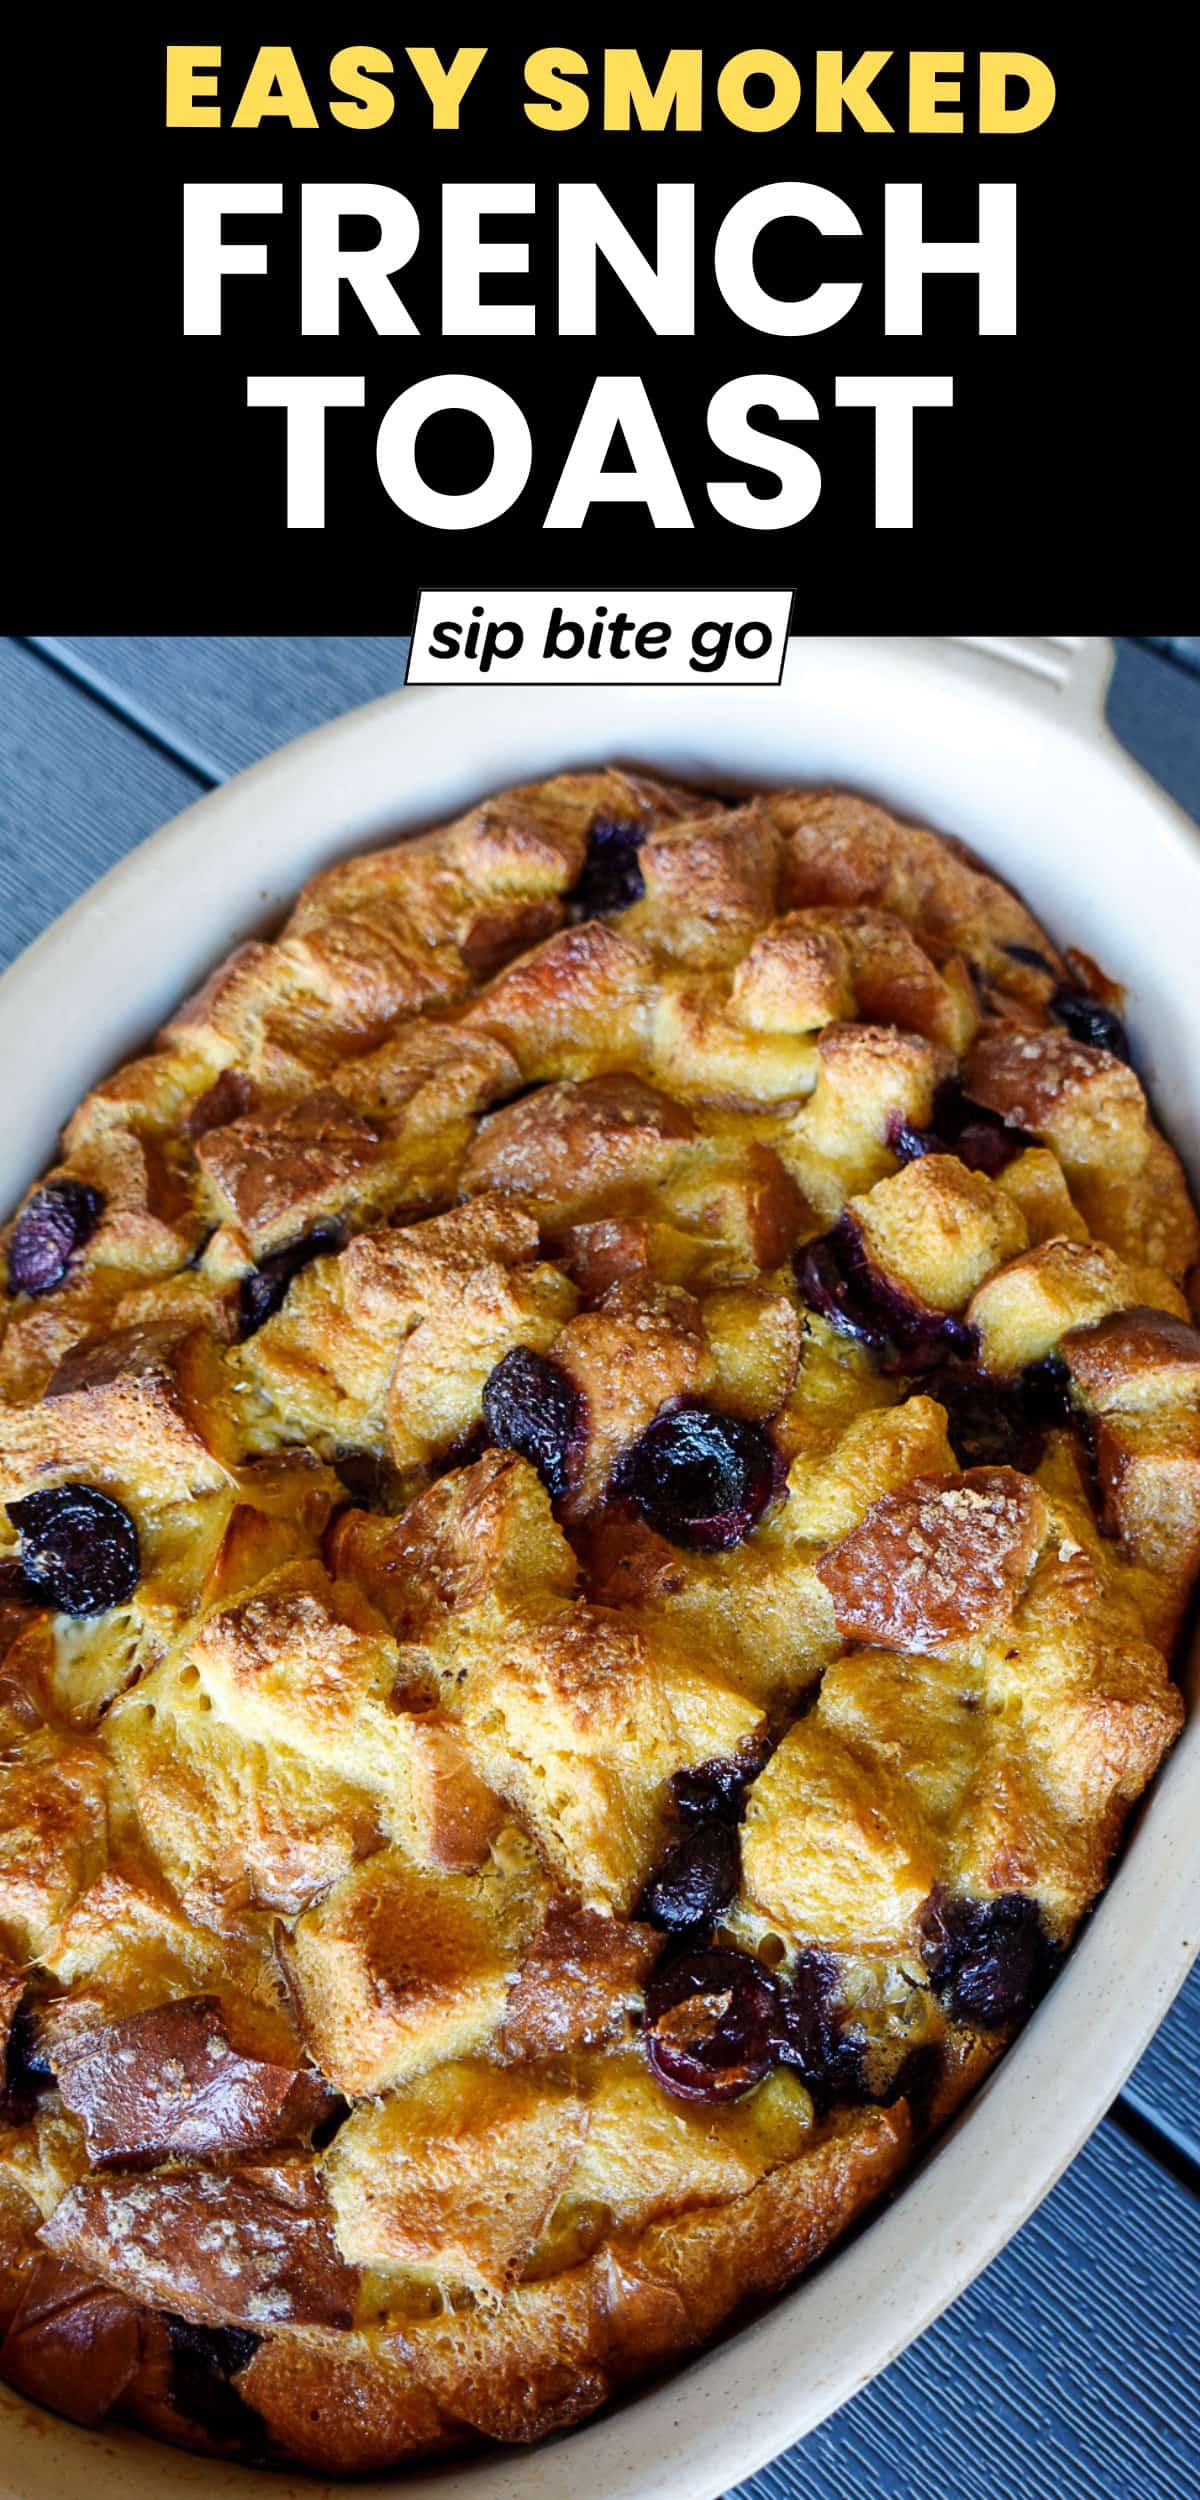 Traeger Smoked French Toast Casserole with Cherries